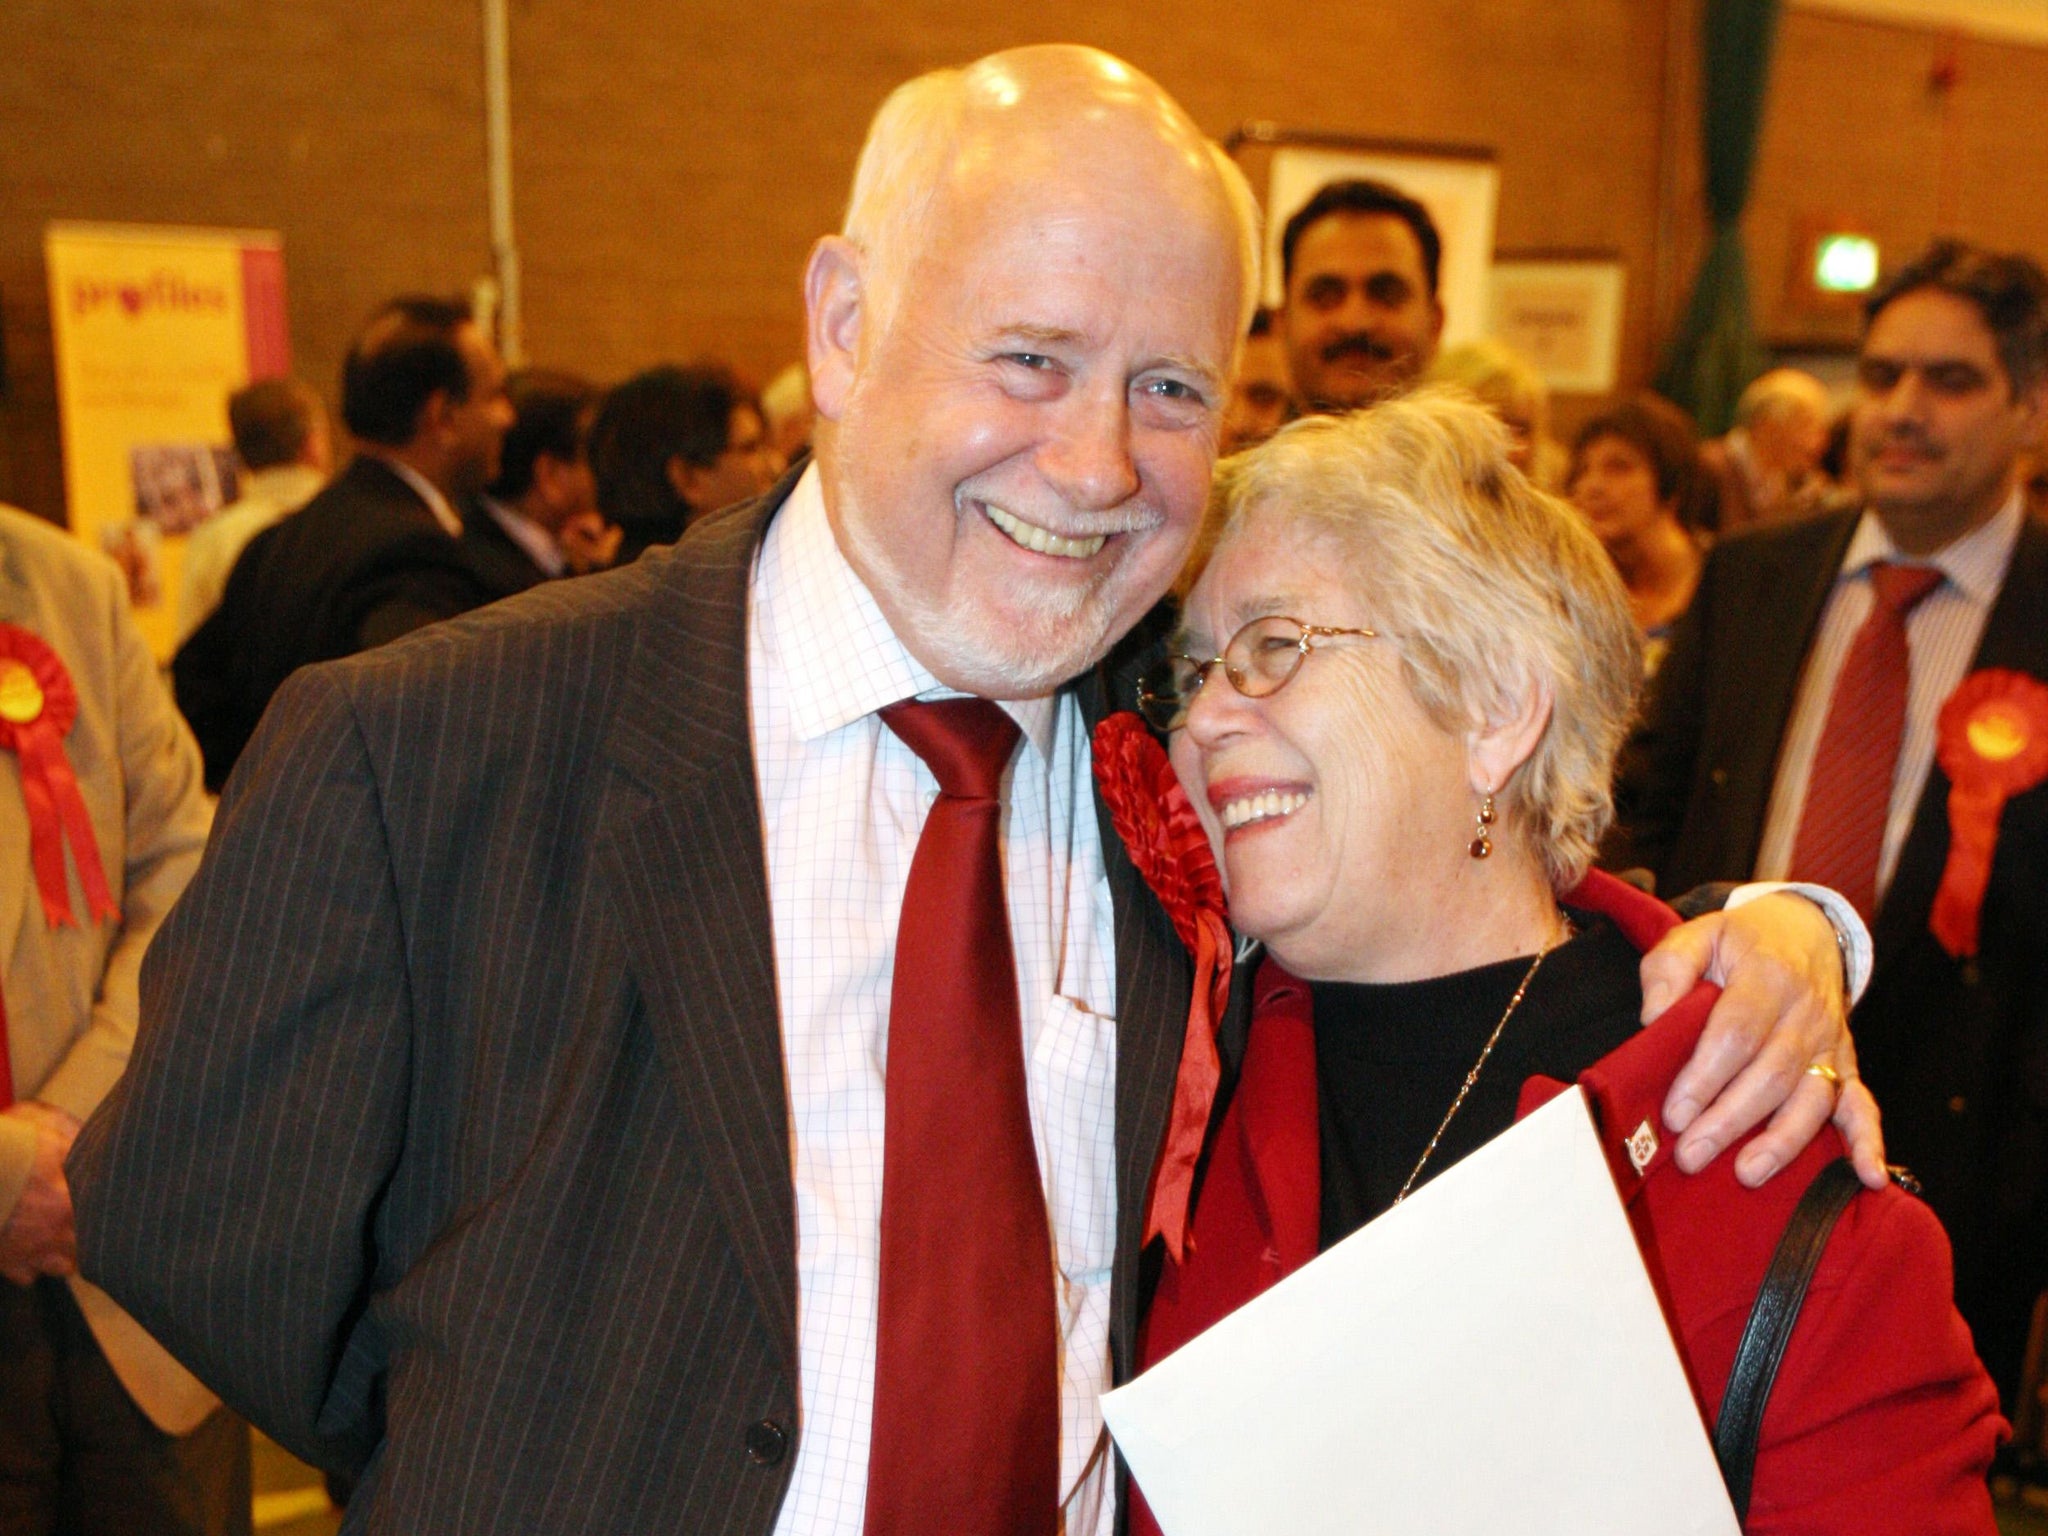 Kelvin Hopkins said he had campaigned for a socialist Britain all his life